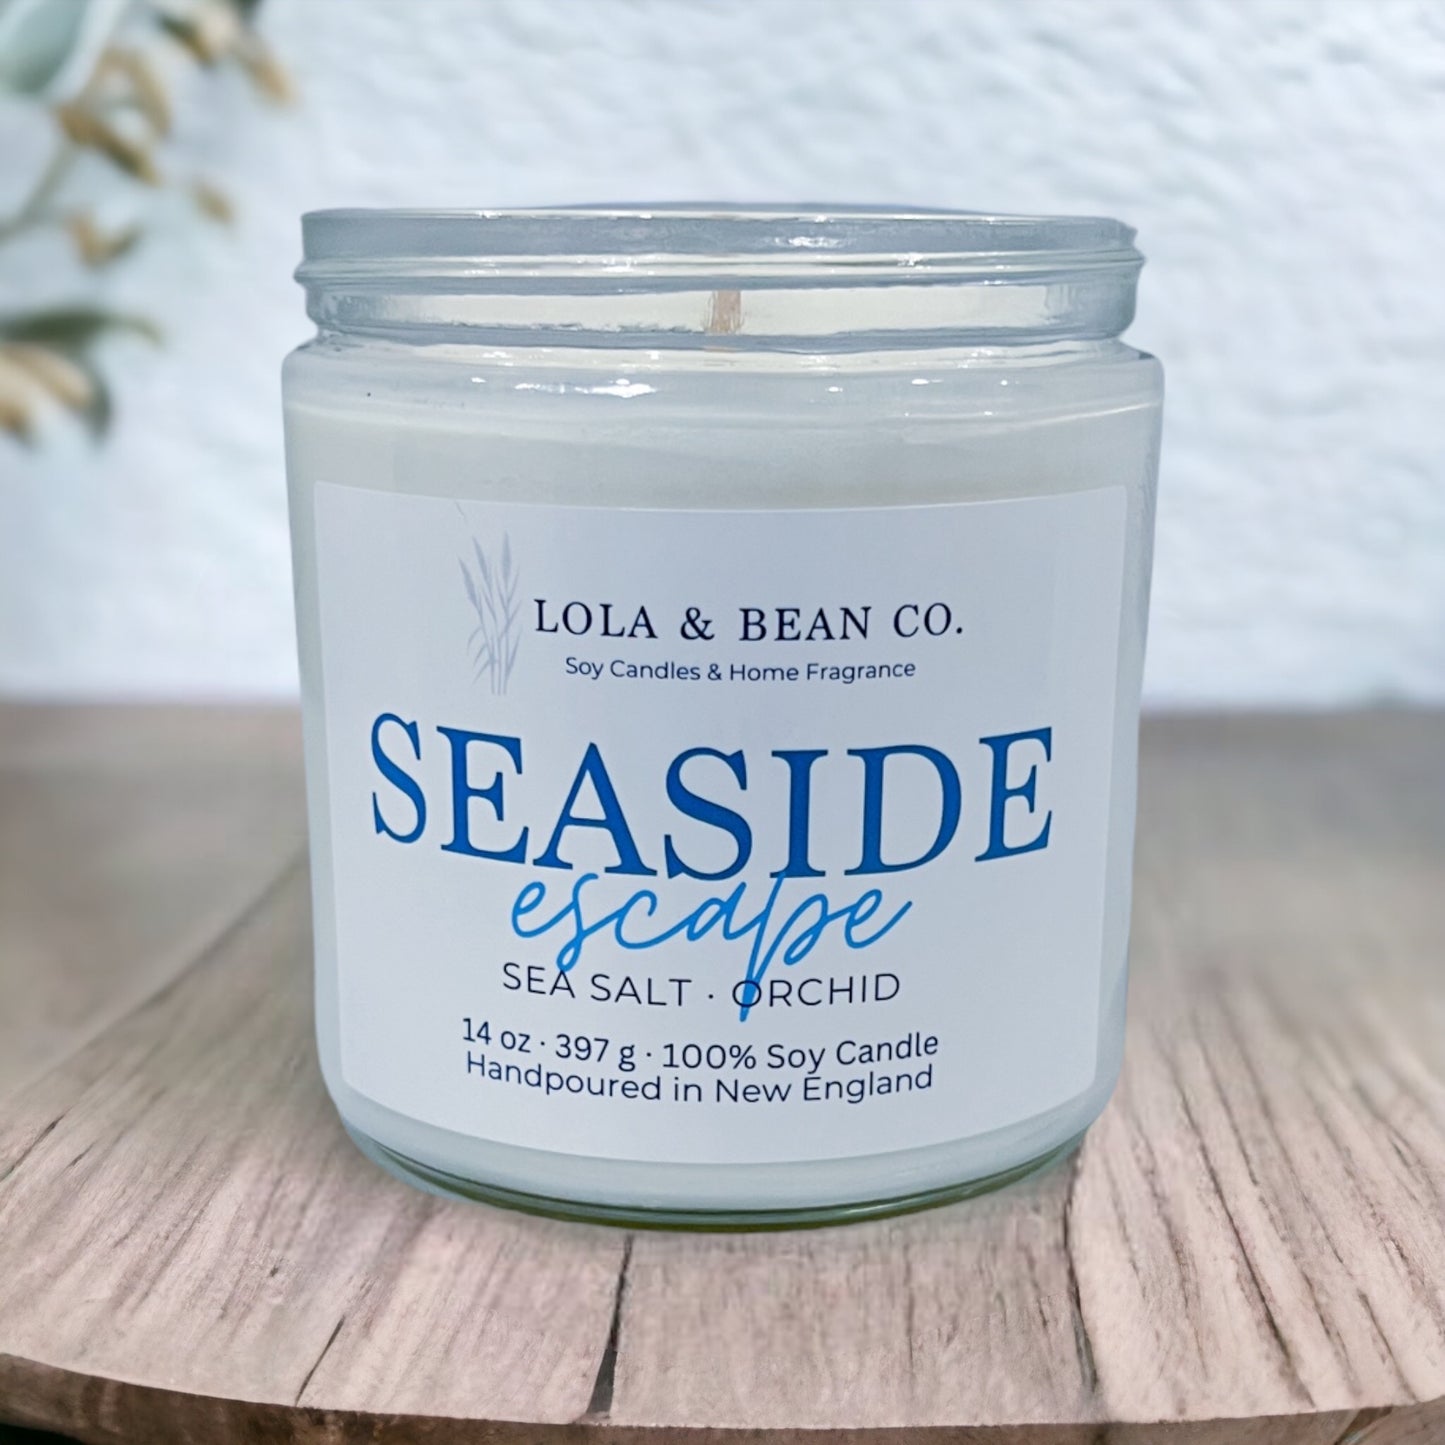 Seaside Escape Soy Candle